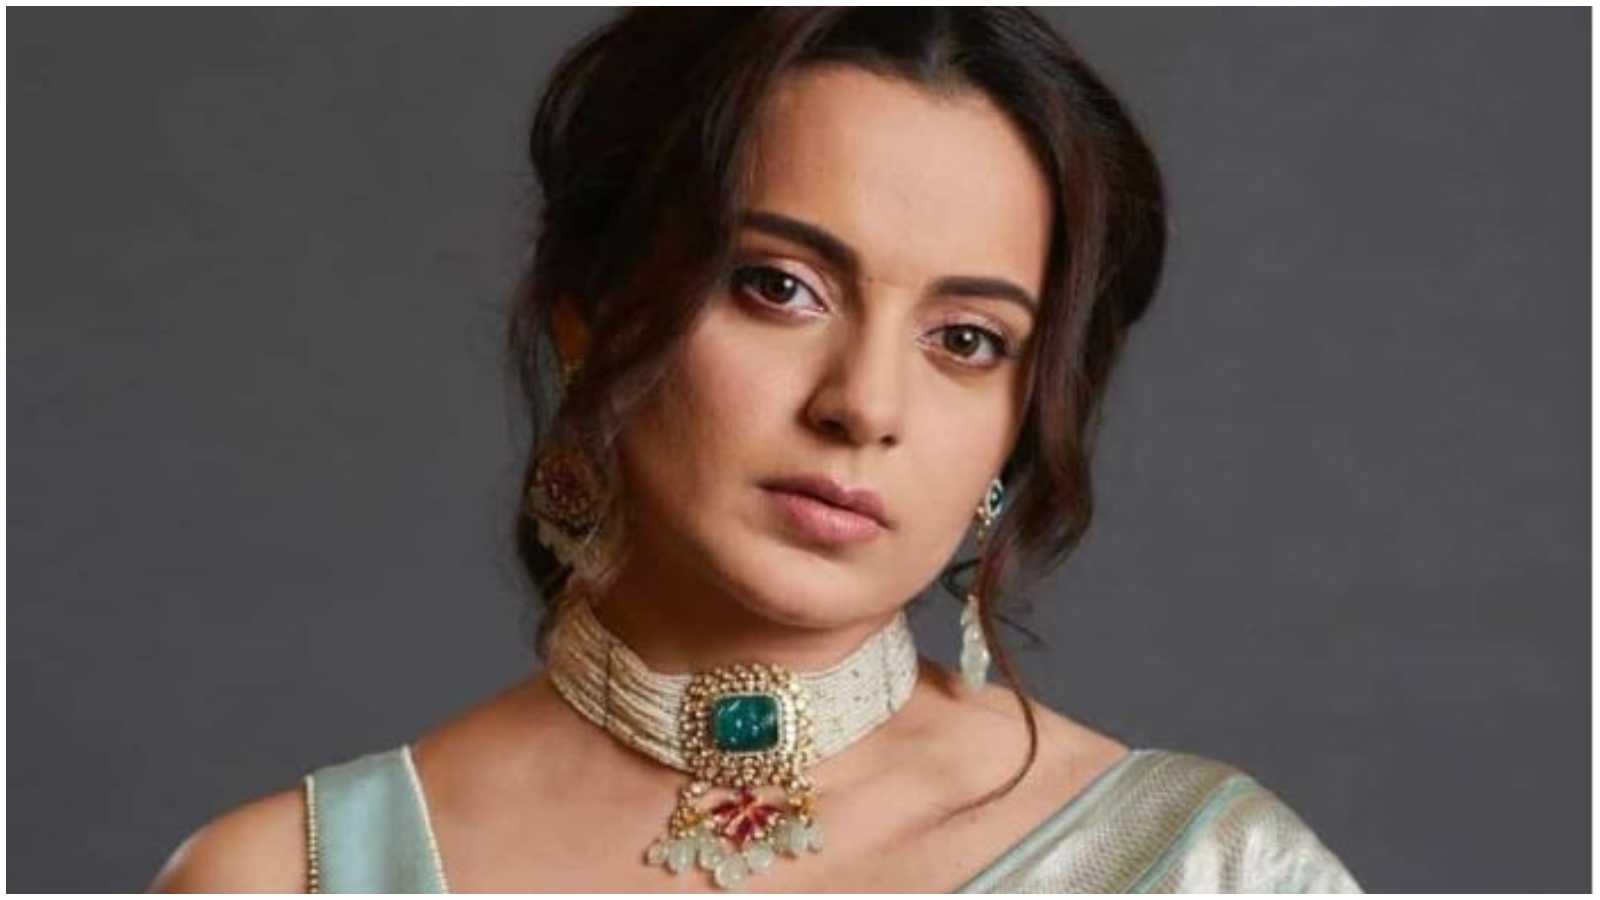 'Other actresses Google pages are...': Kangana Ranaut continues to rant against negative media reports on her